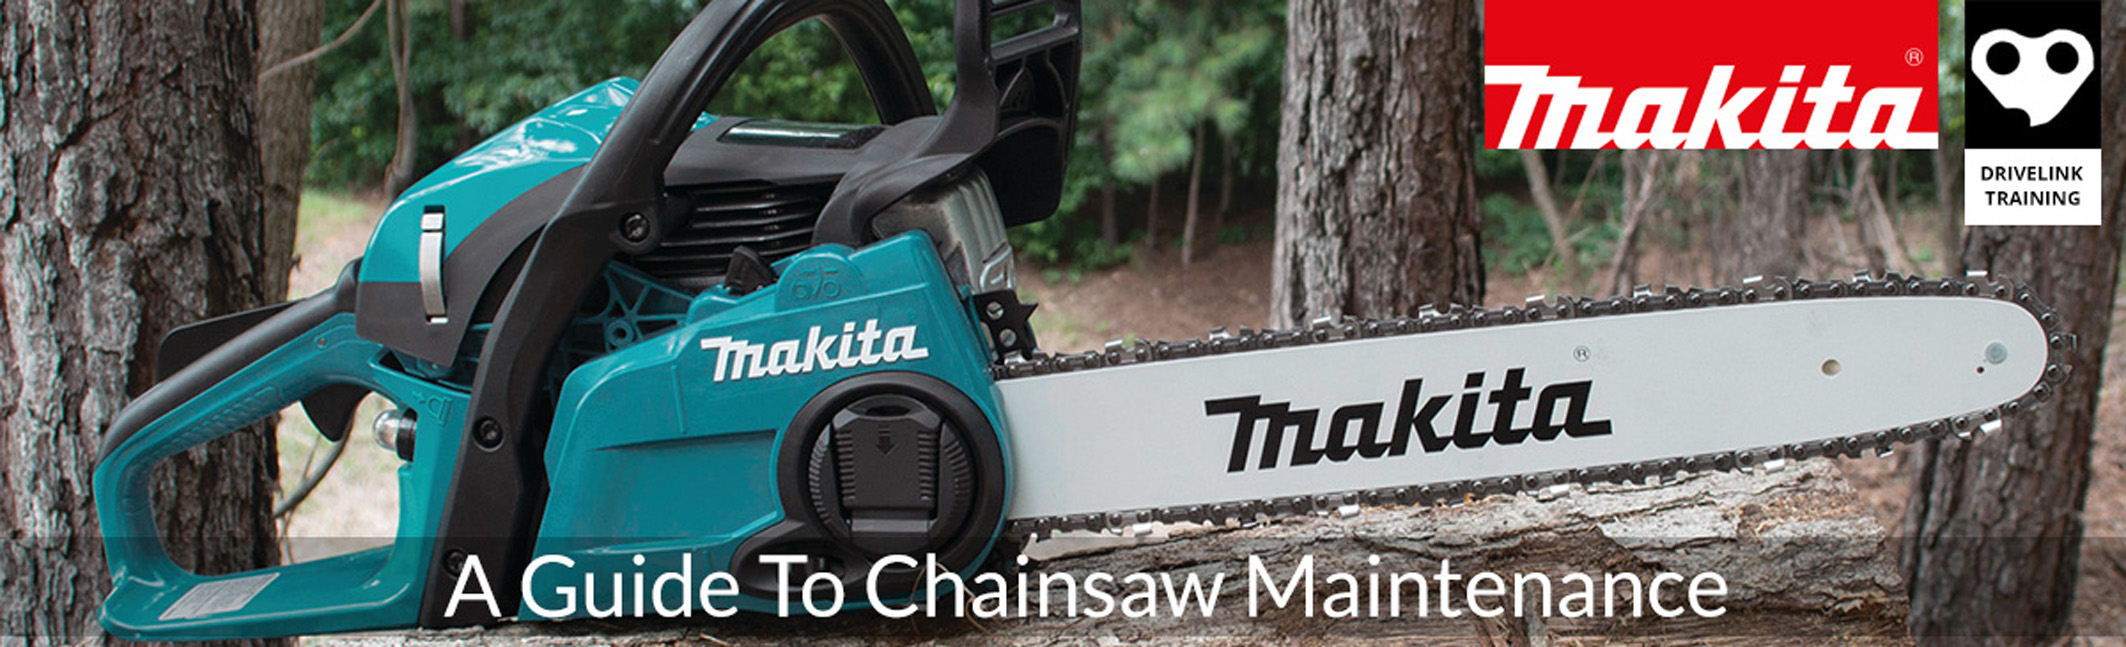 MAKITA BACK FREE DOWNLOADABLE GUIDE TO CHAINSAW MAINTENANCE